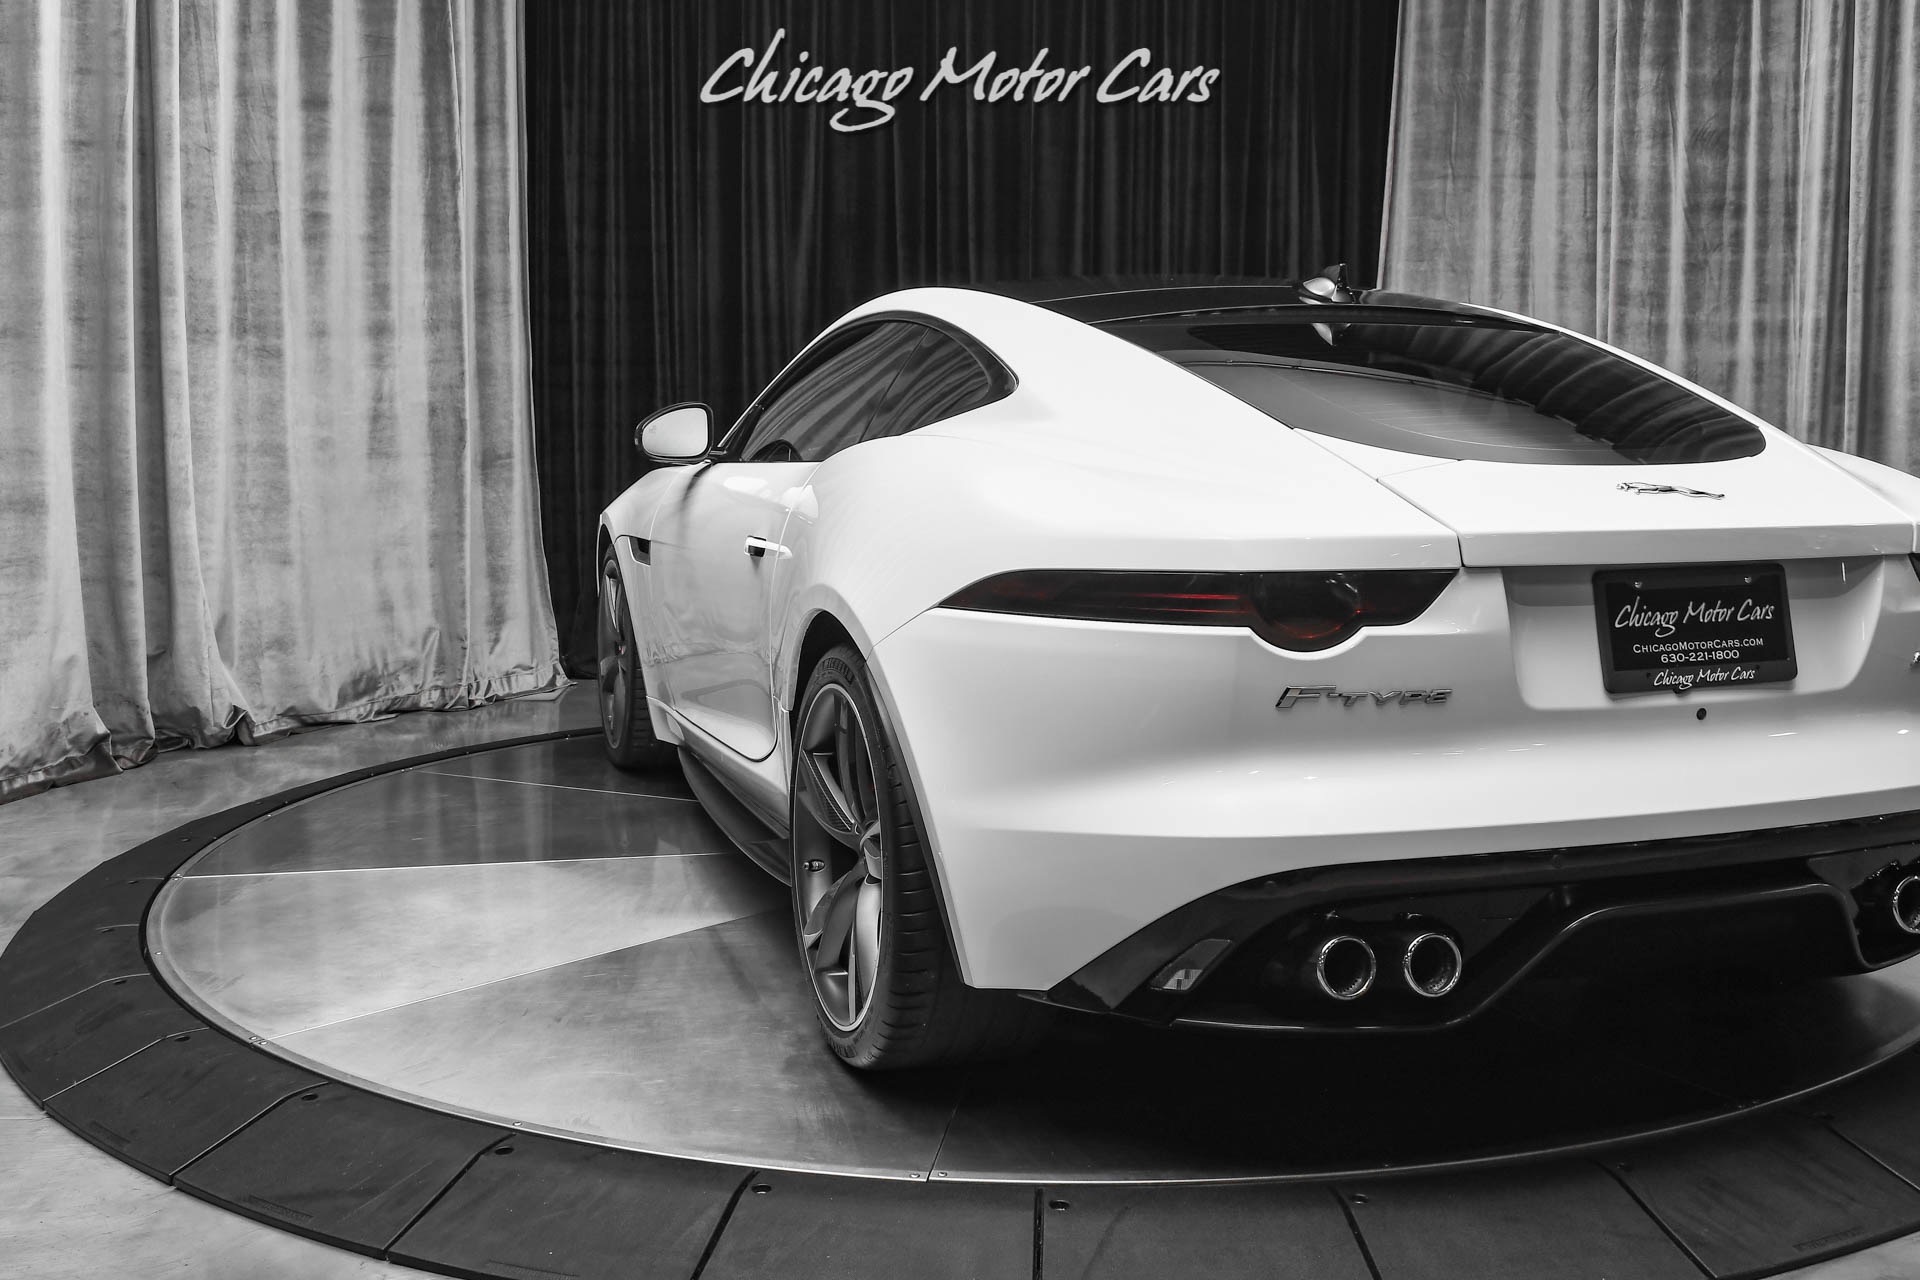 Used-2016-Jaguar-F-TYPE-R-Coupe-Active-Warranty-Serviced-Loaded